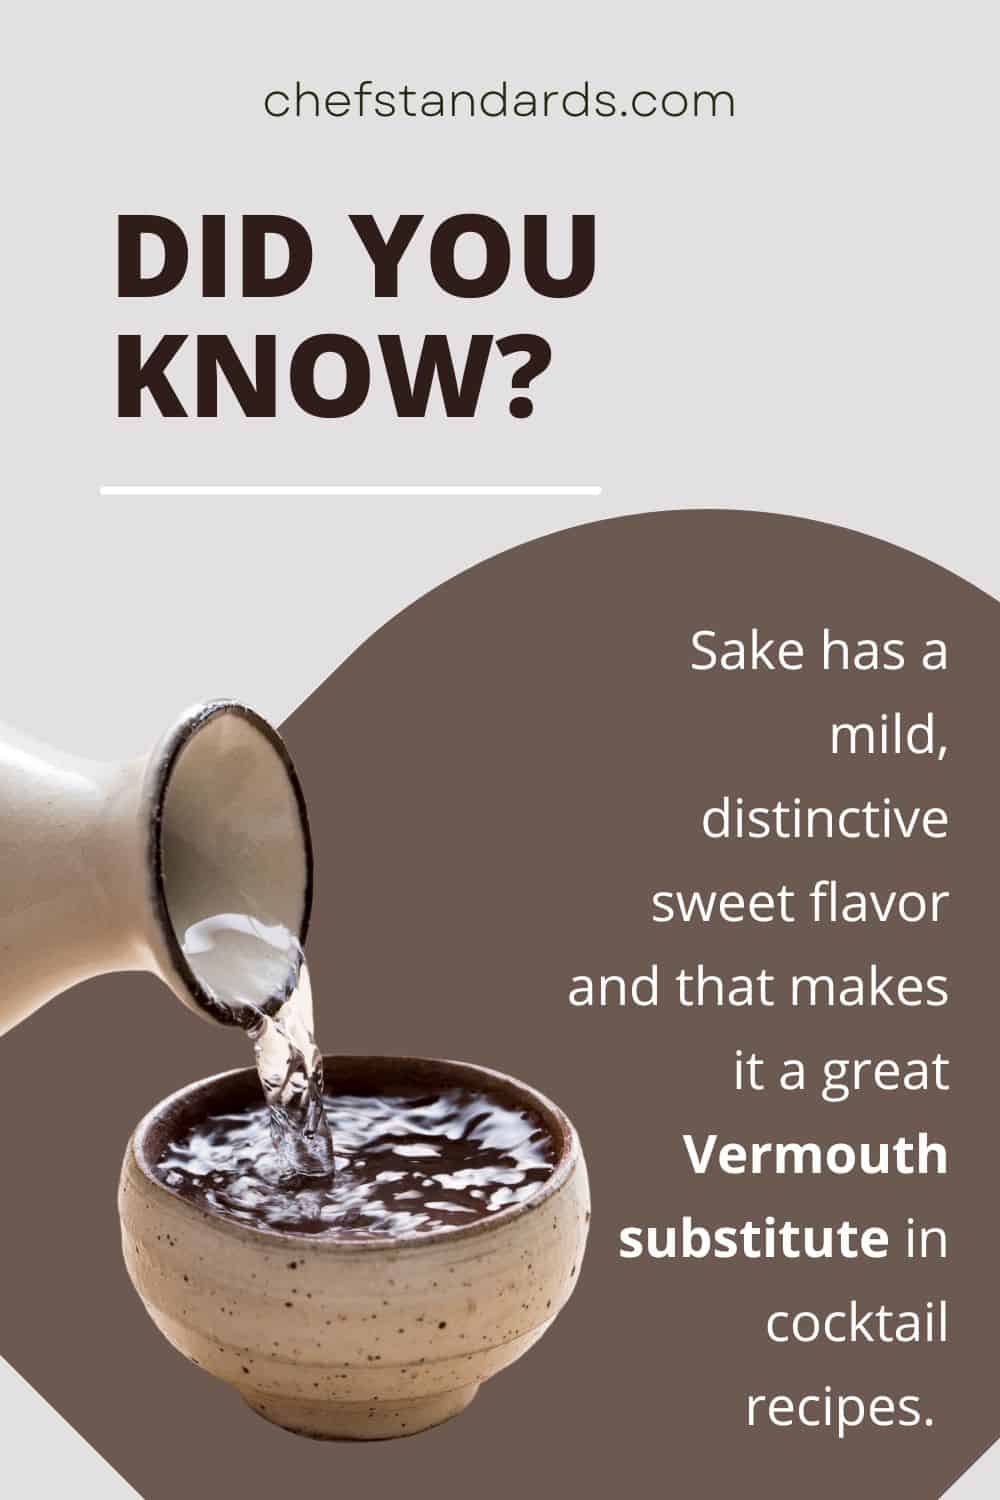 Vermouth substitute - did you know infographic